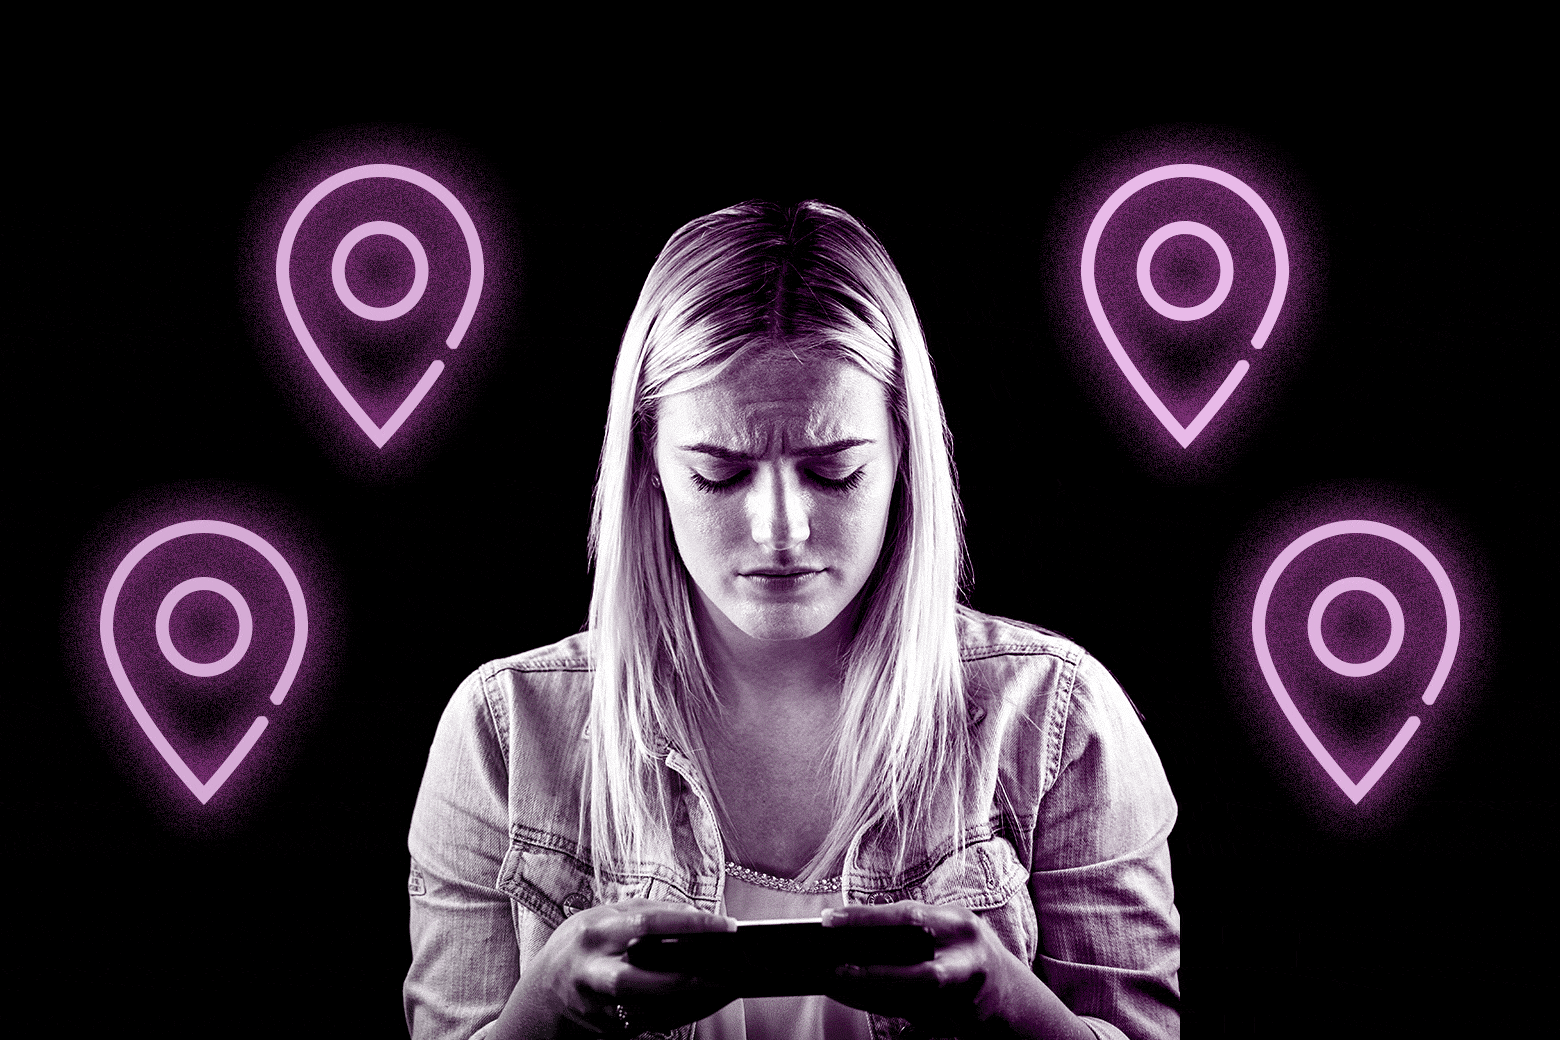 GIF of a concerned-looking woman staring at a phone while neon location symbols glow in the background.